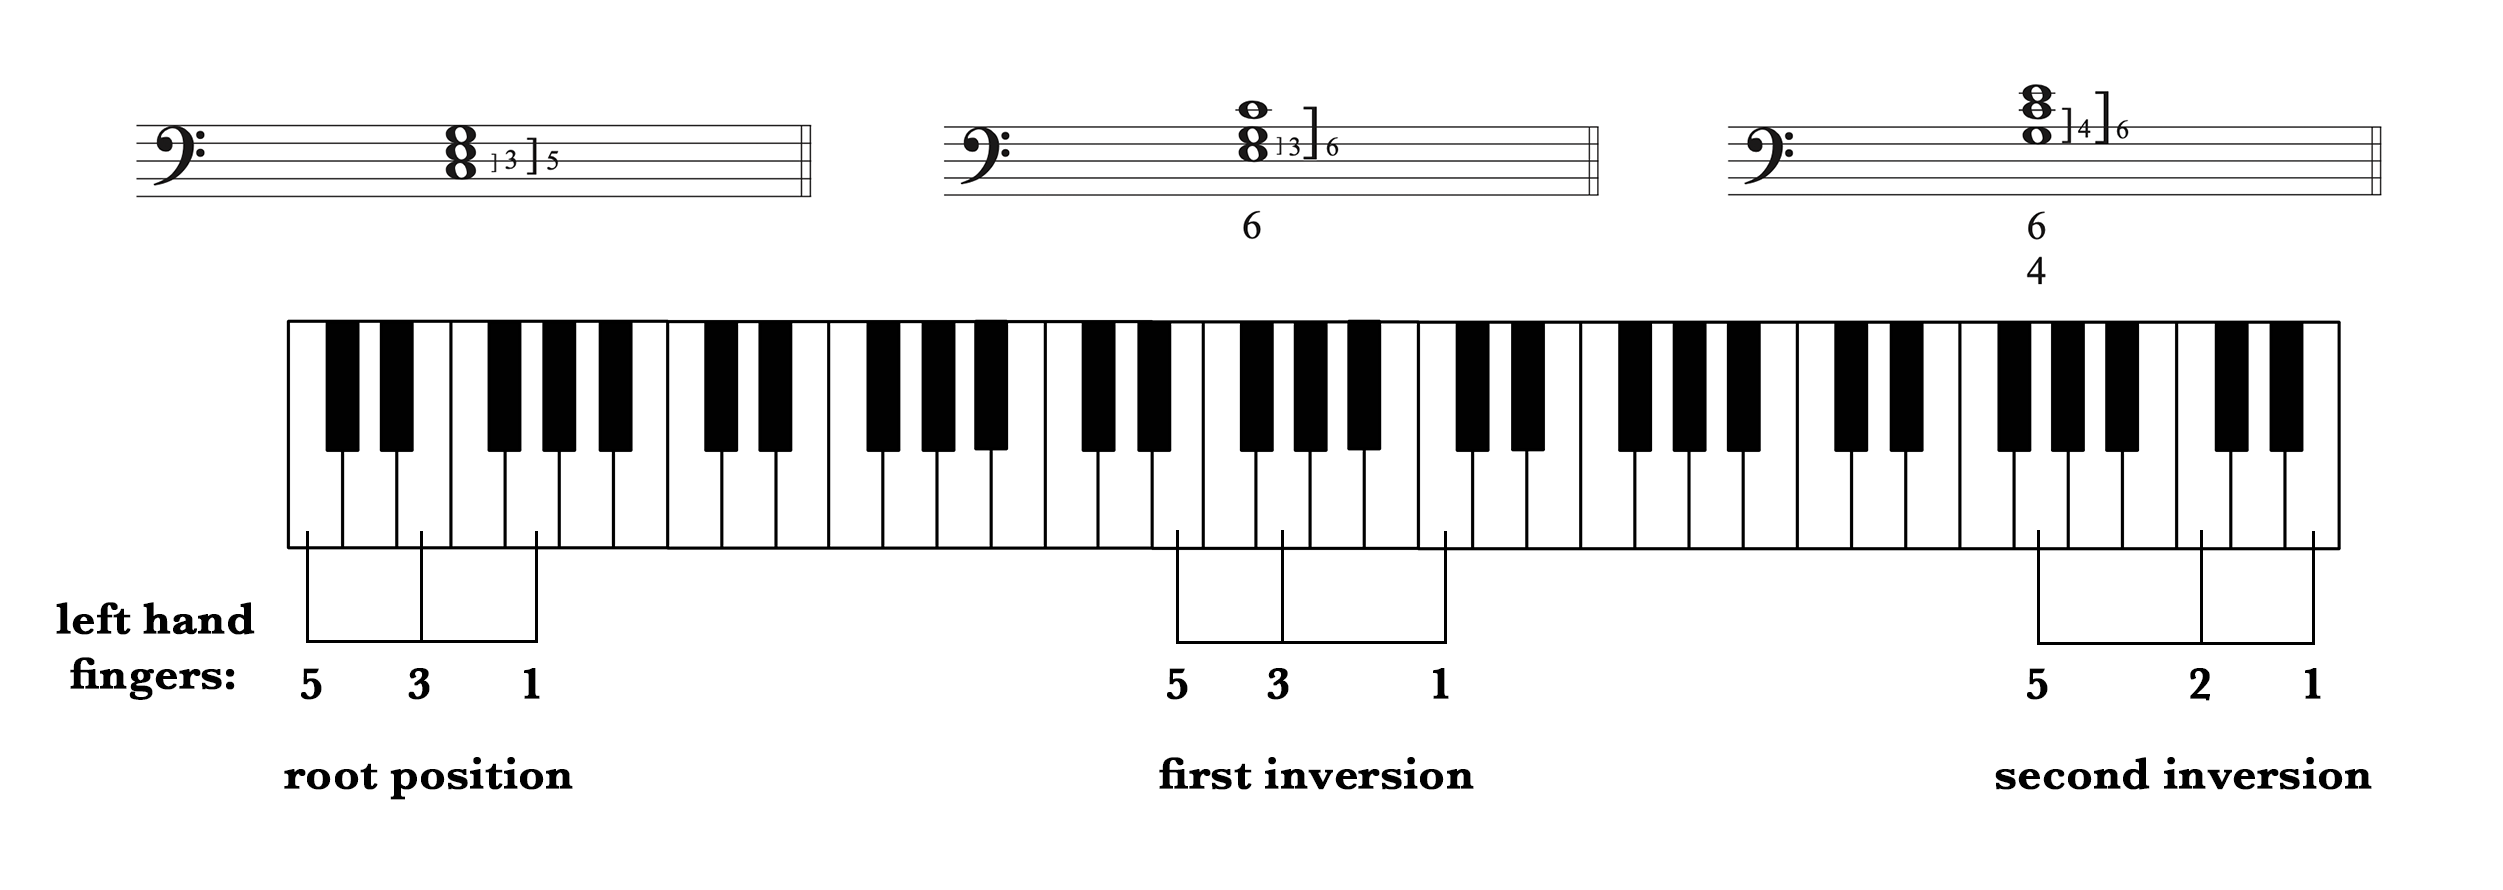 Chart showing finger spacing on a keyboard and the corresponding placement of notes on a staff for triads in each inversion.